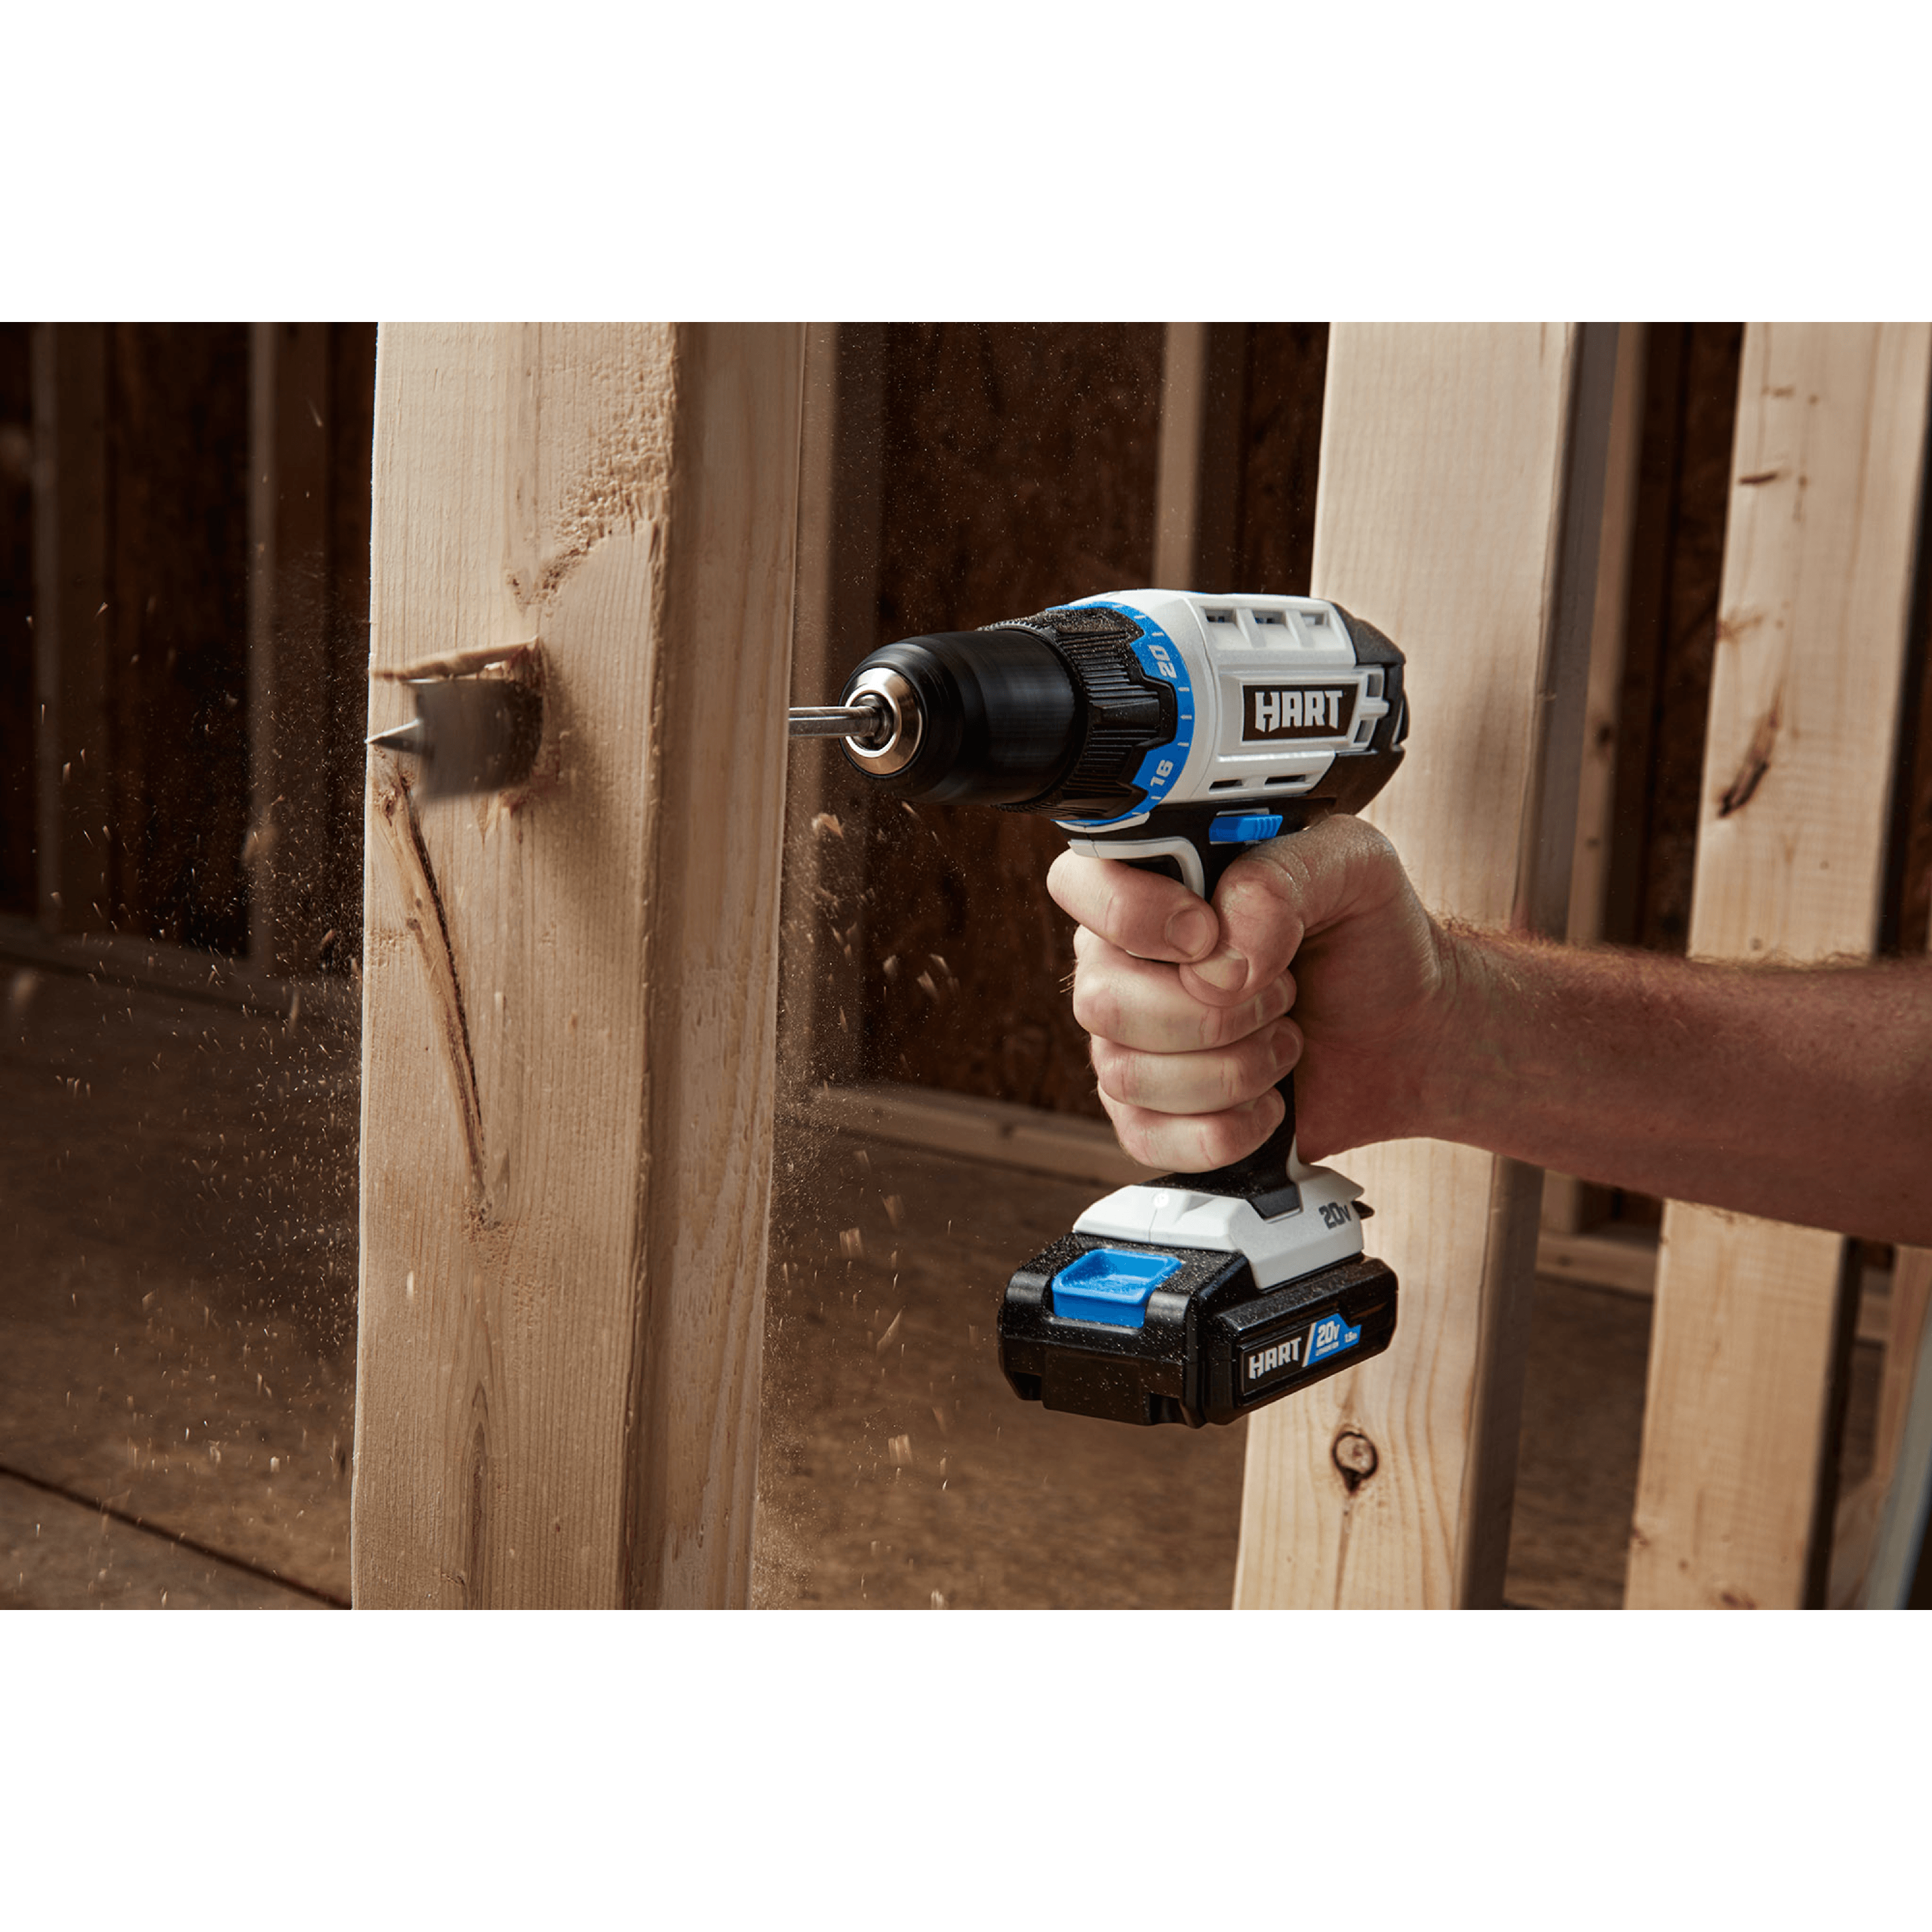 HART 20-Volt Cordless 1/2-inch Drill/Driver Kit (1) 1.5Ah Lithium-Ion Battery - image 11 of 17